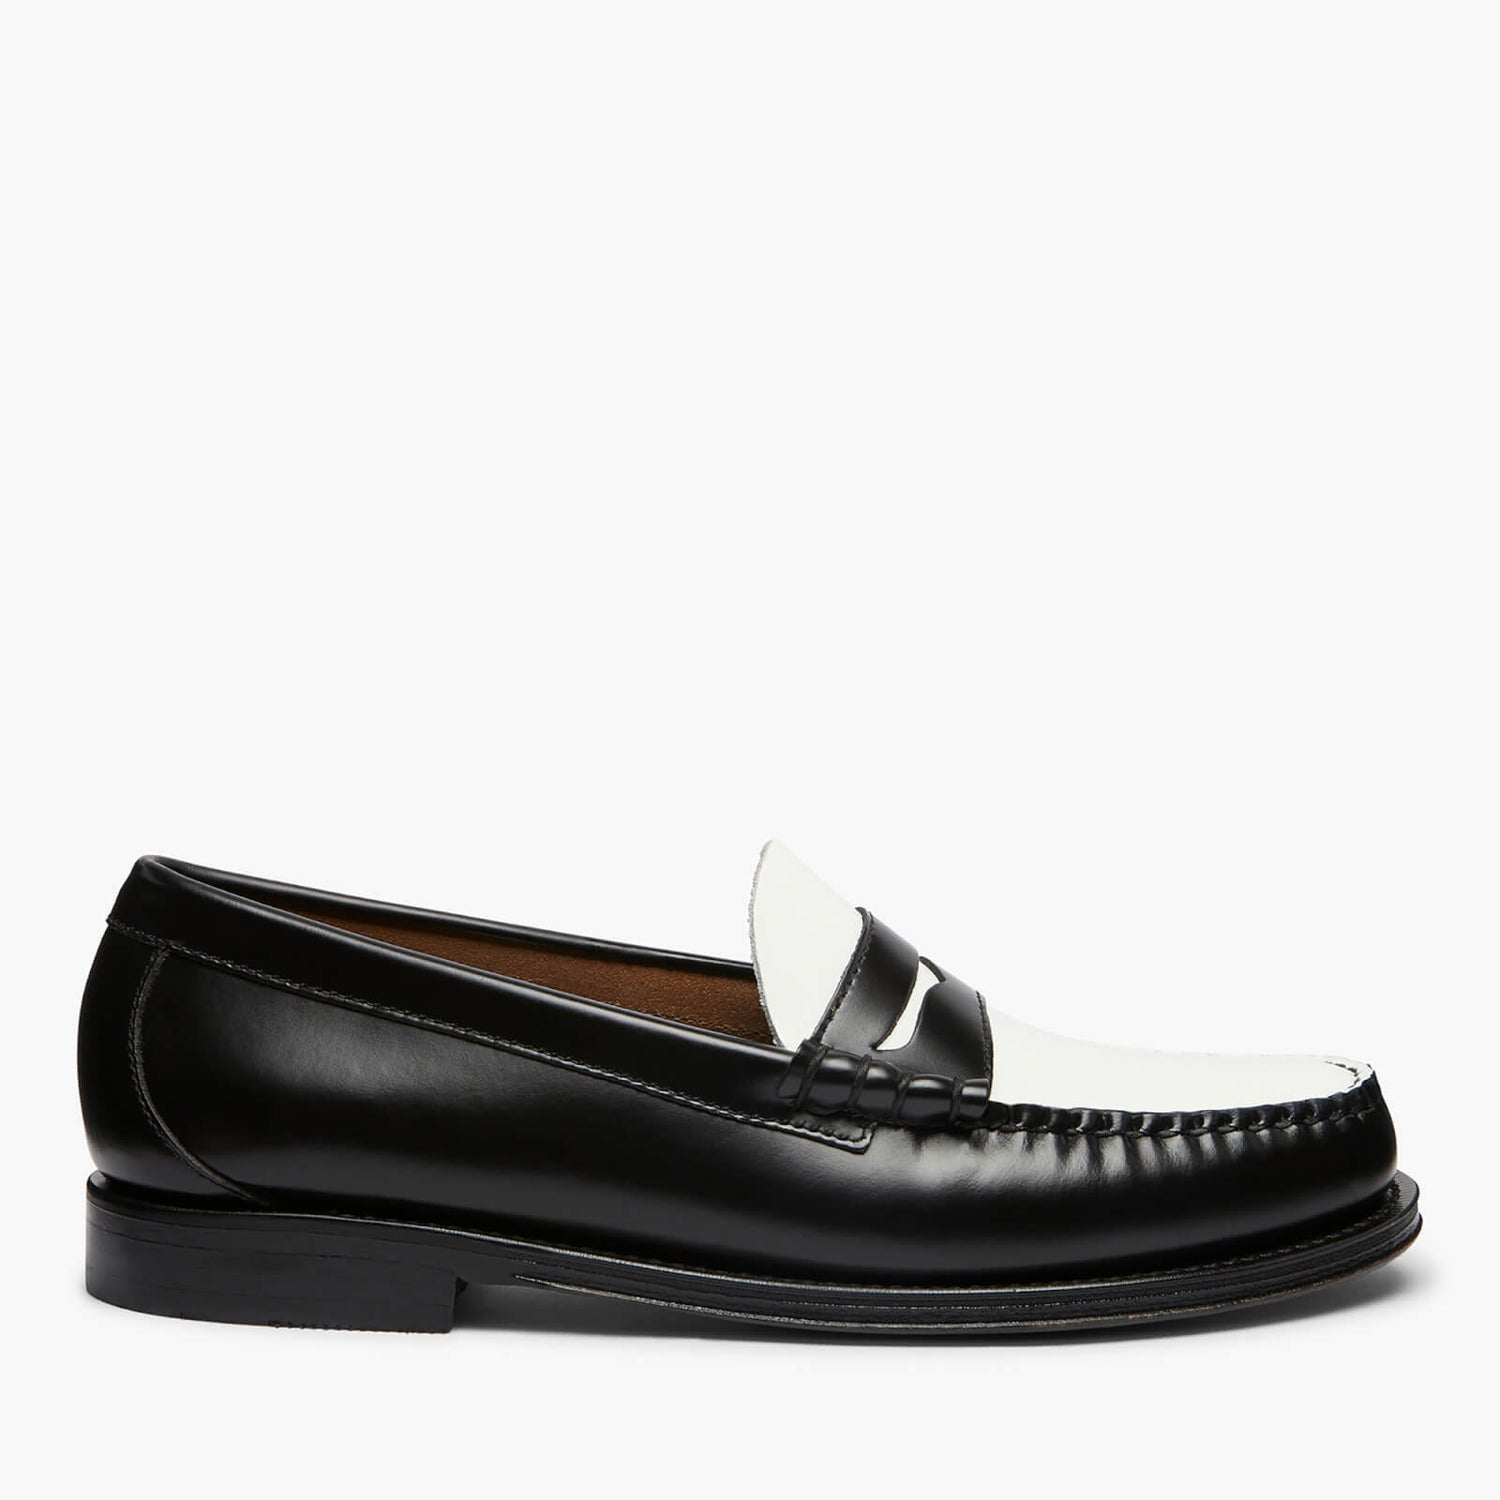 G.H. Bass & Co. Men's Larson Leather Penny Loafers - UK 7